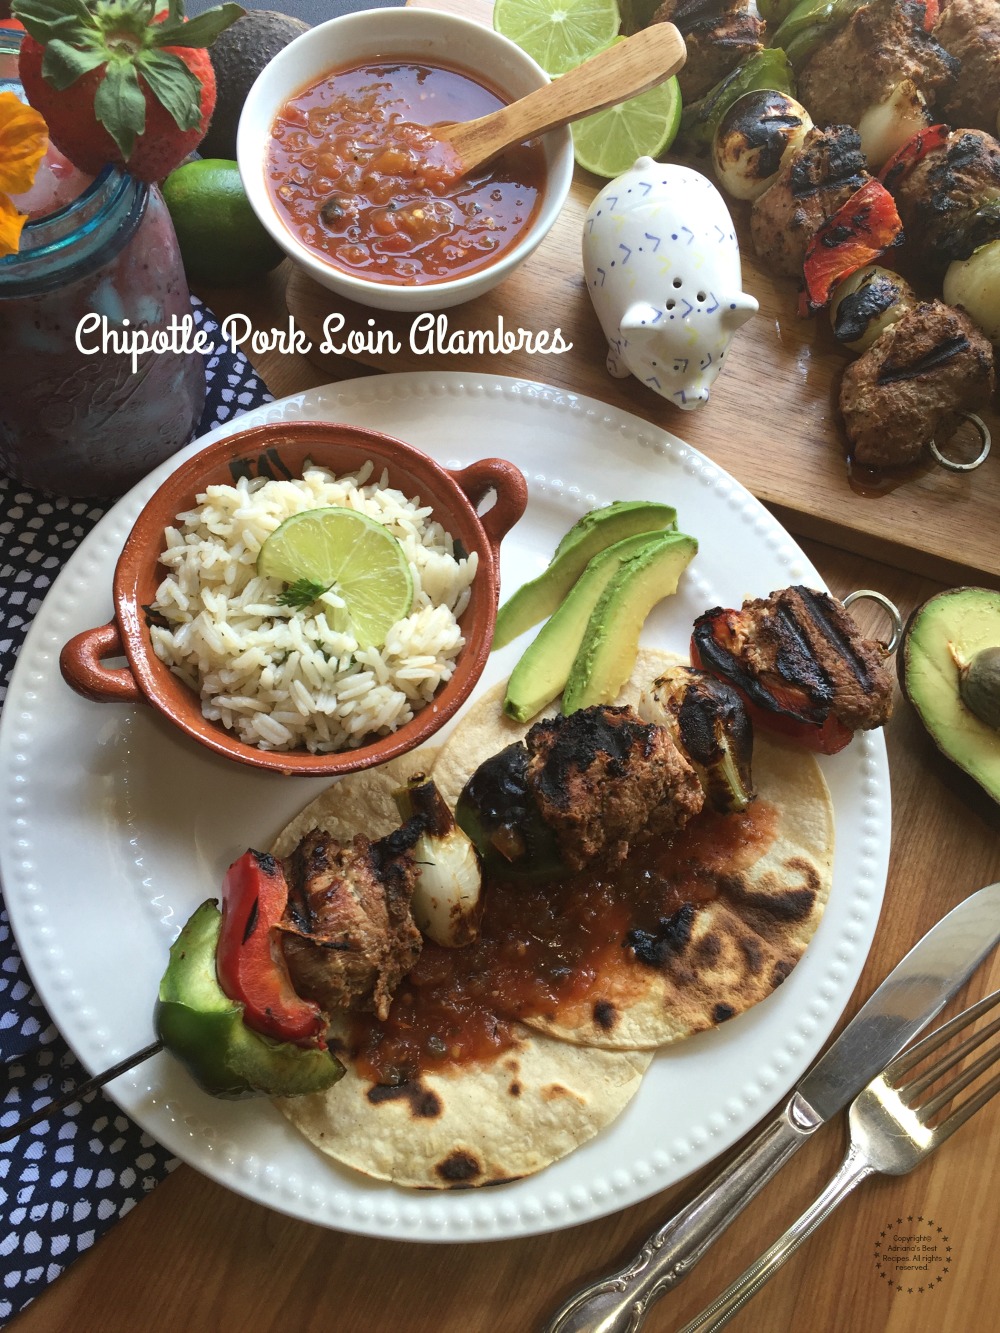 Chipotle Pork Loin Alambres a flavorful dish to enjoy this summer grilling season